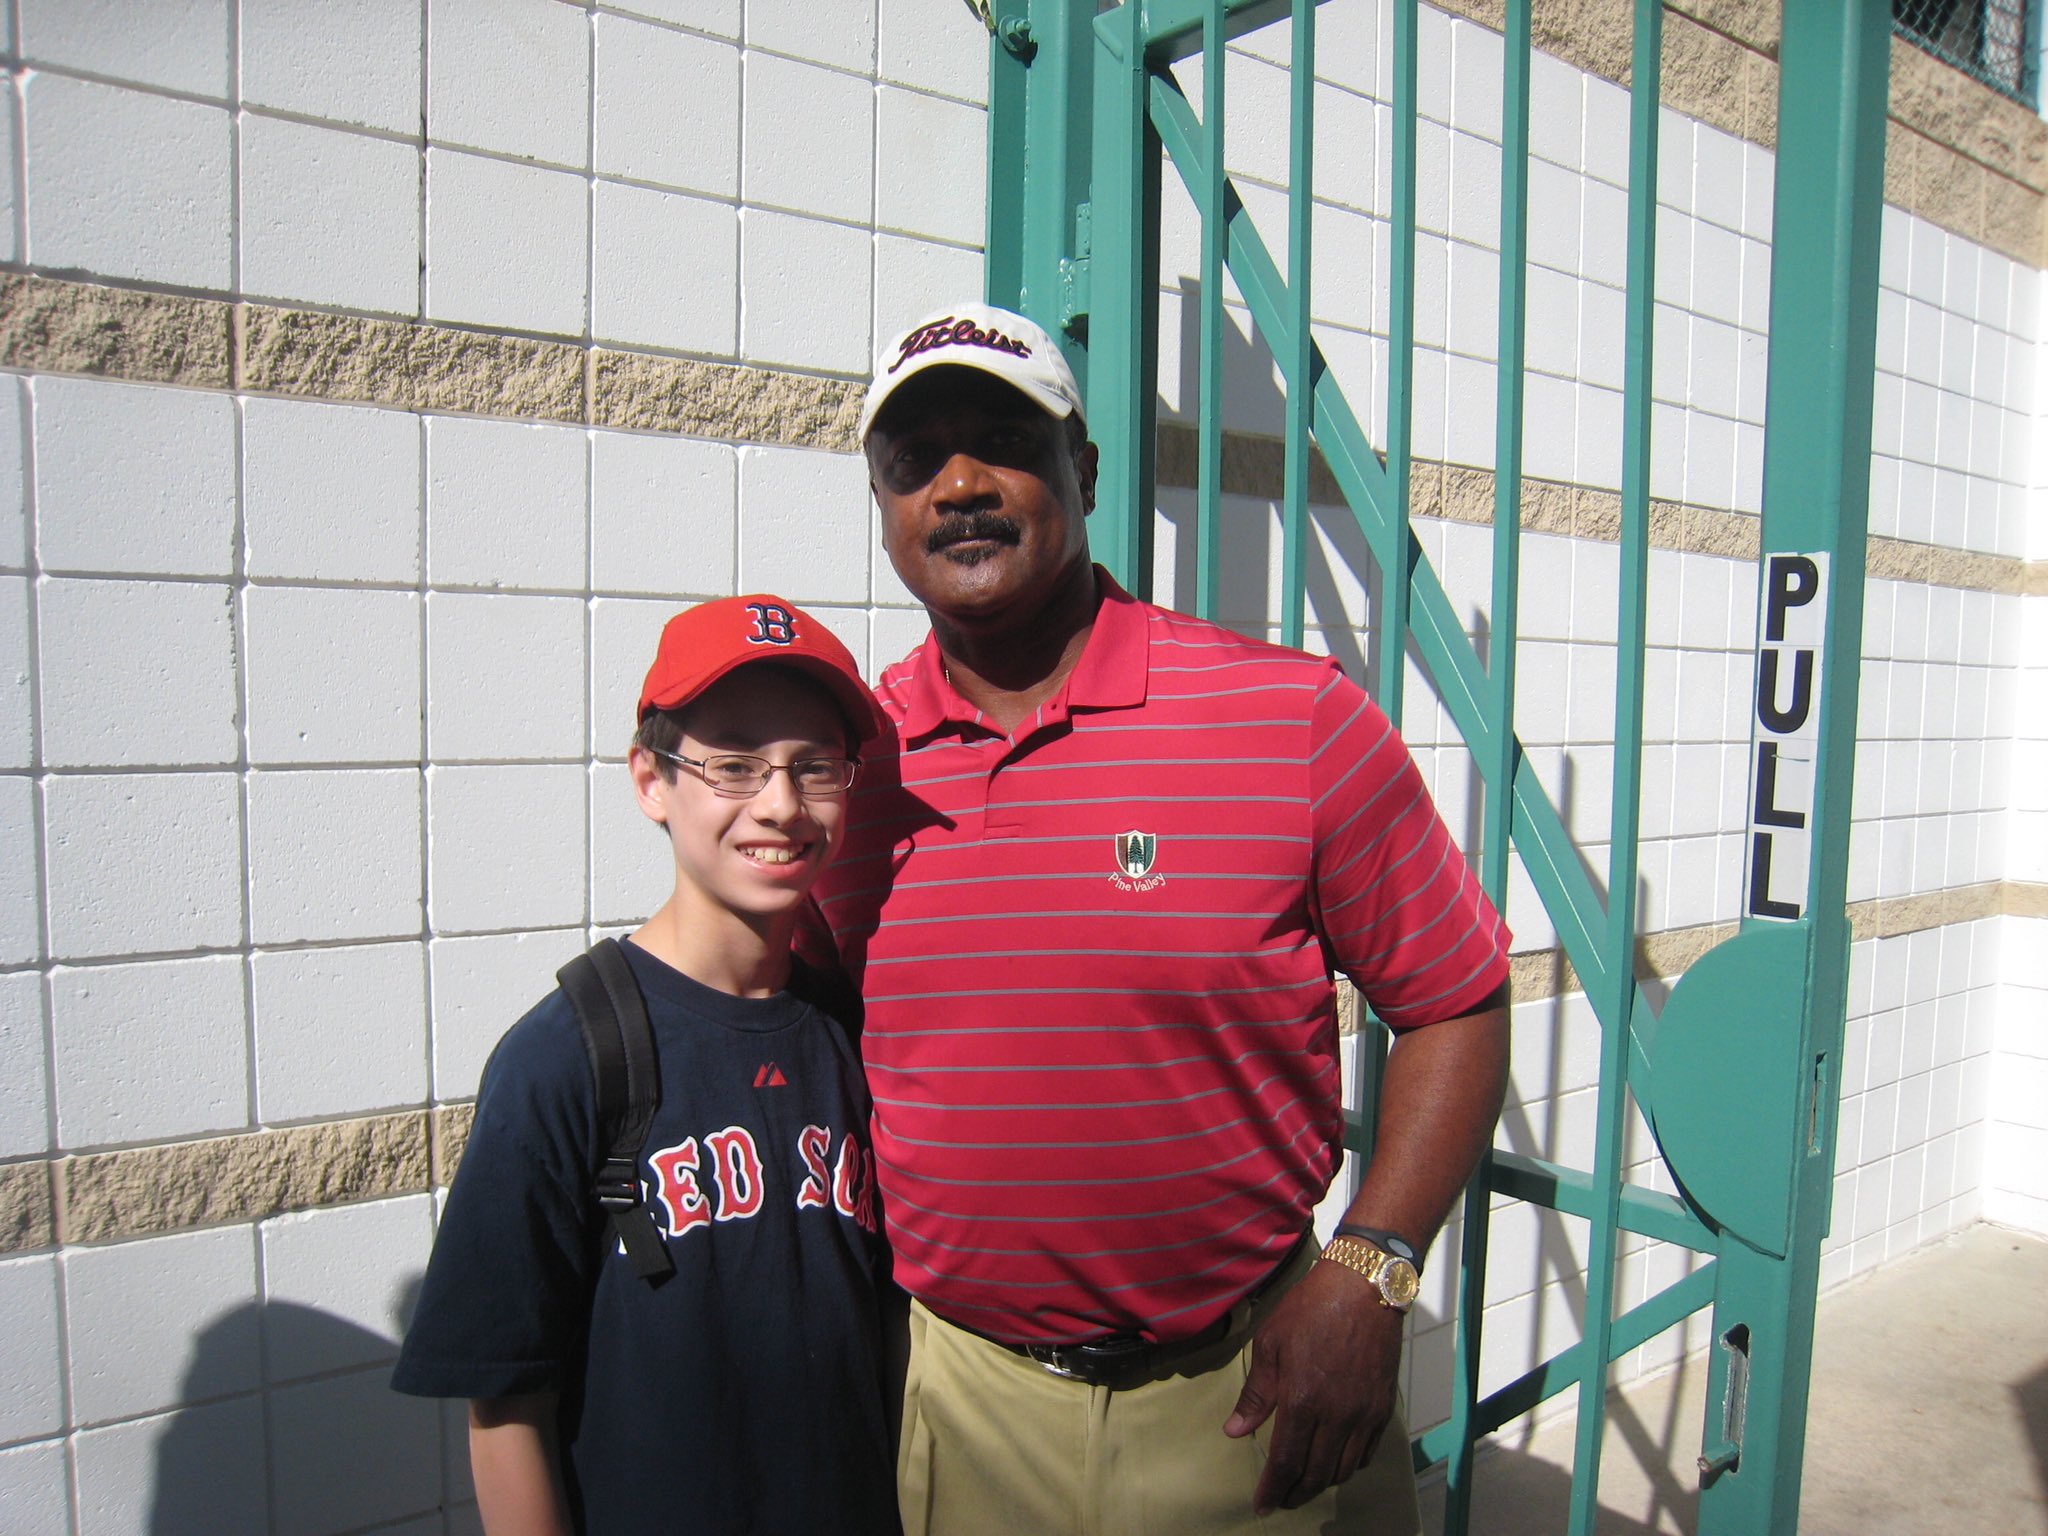 Happy birthday to the great Jim Rice! I need to get an updated photo haha 